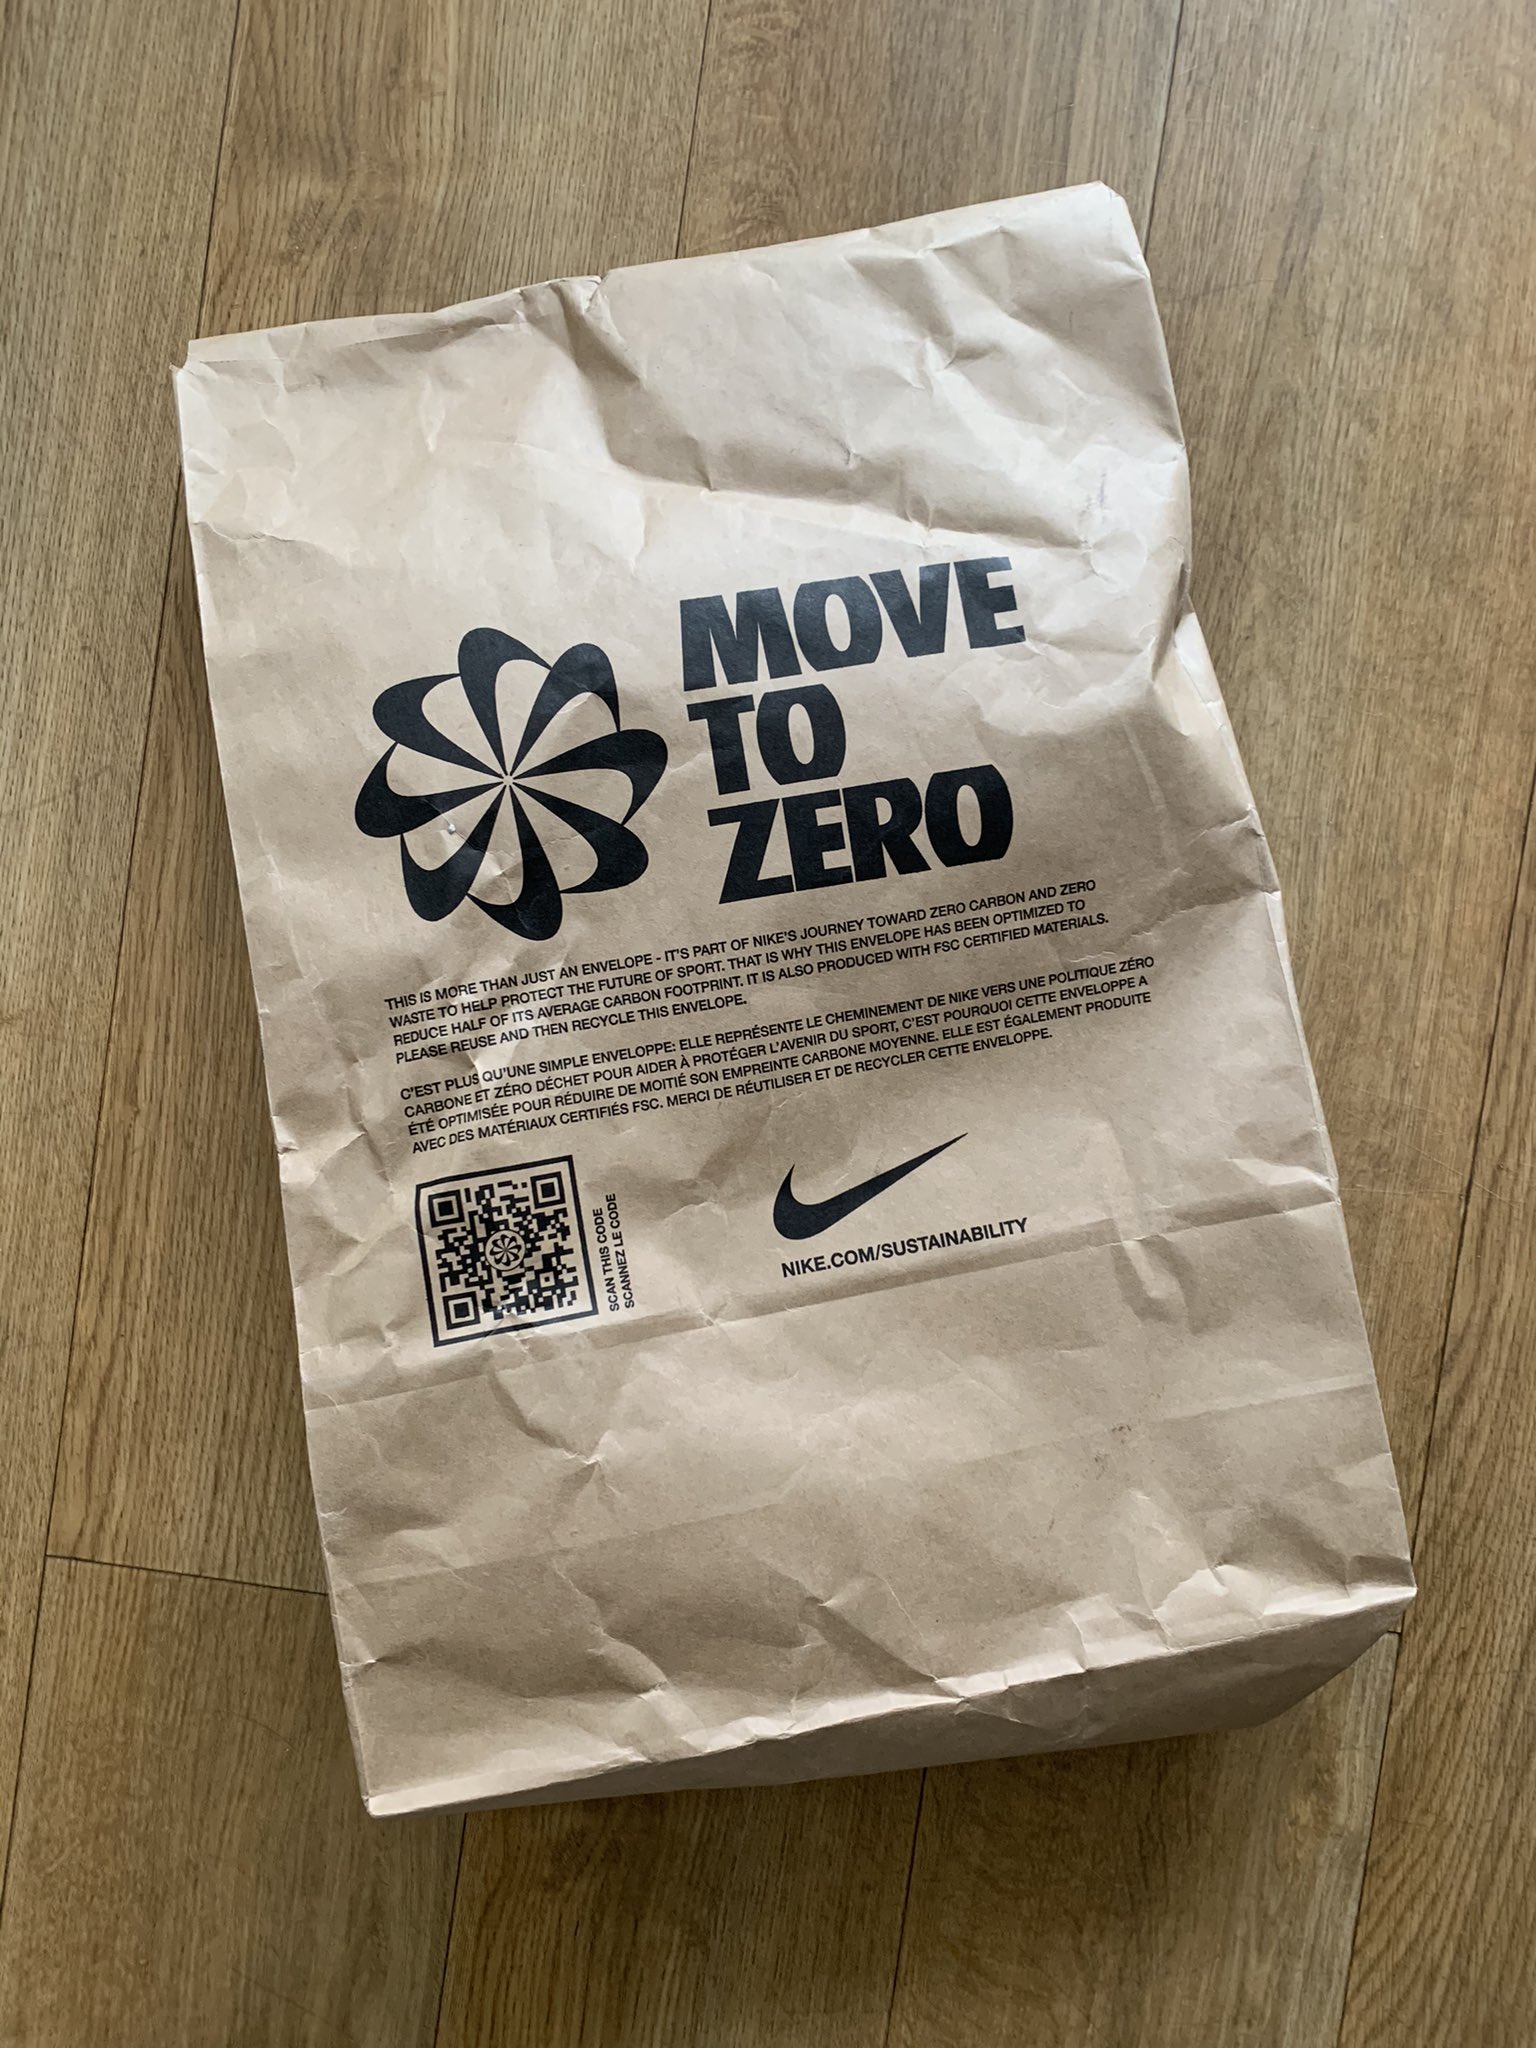 Mike Hann on X: this packaging and Zero (Carbon and Waste) initiative from Nike. 👌🏼 https://t.co/Sl8W4mnv8r" / X